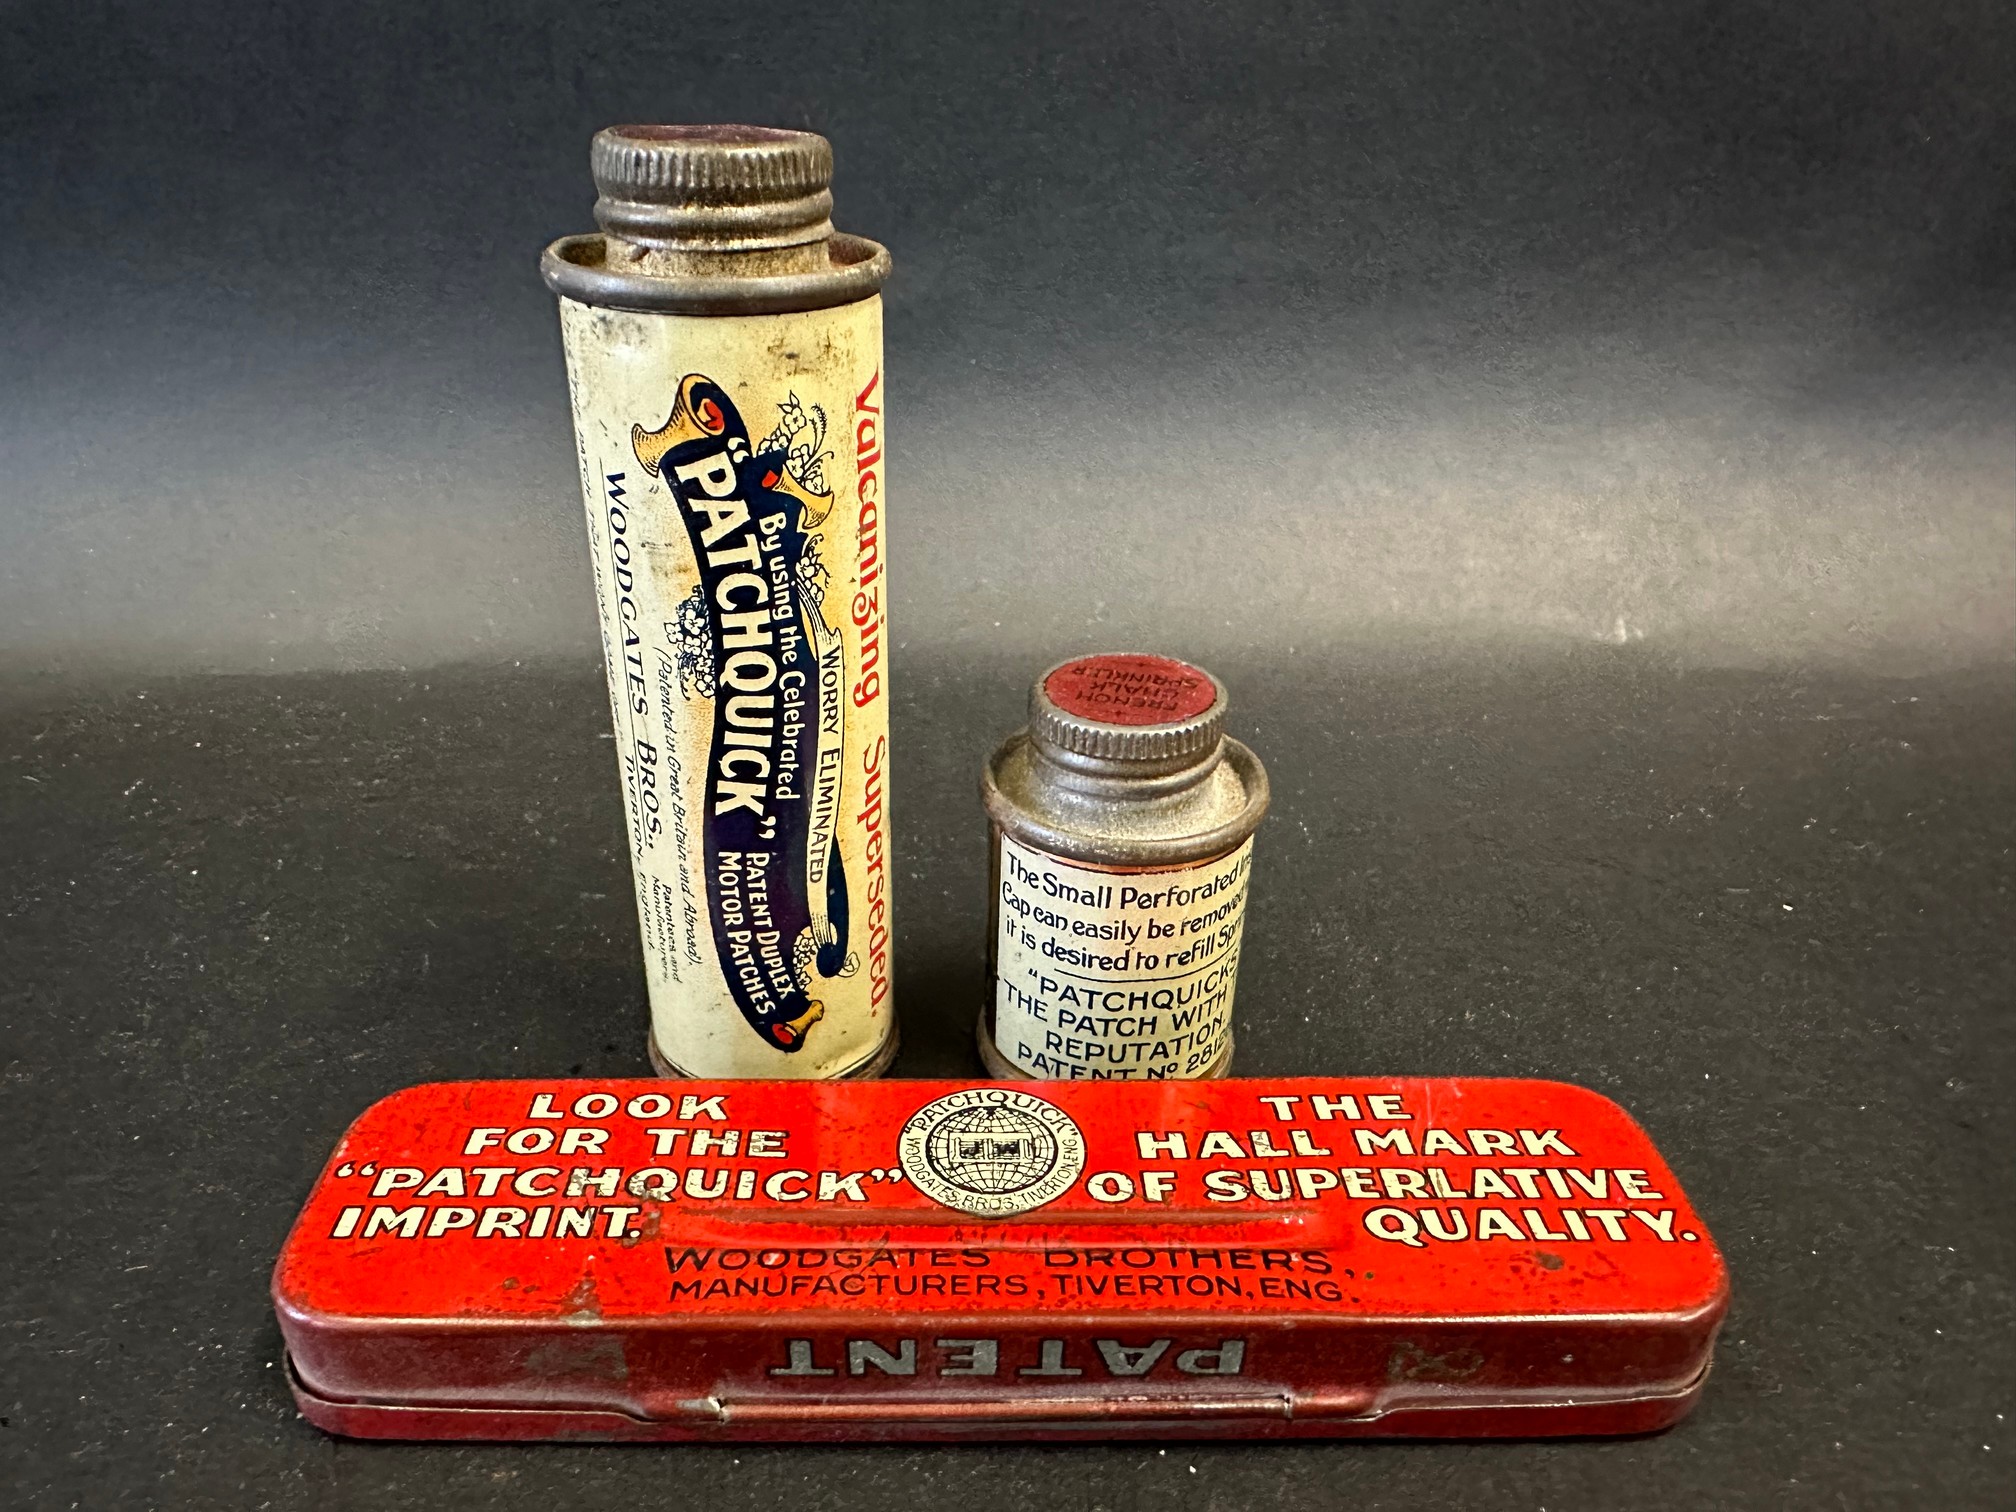 A Patchquick Cycle Repair Outfit and two Patchquick cylindrical tins all in very good condition. - Image 2 of 3